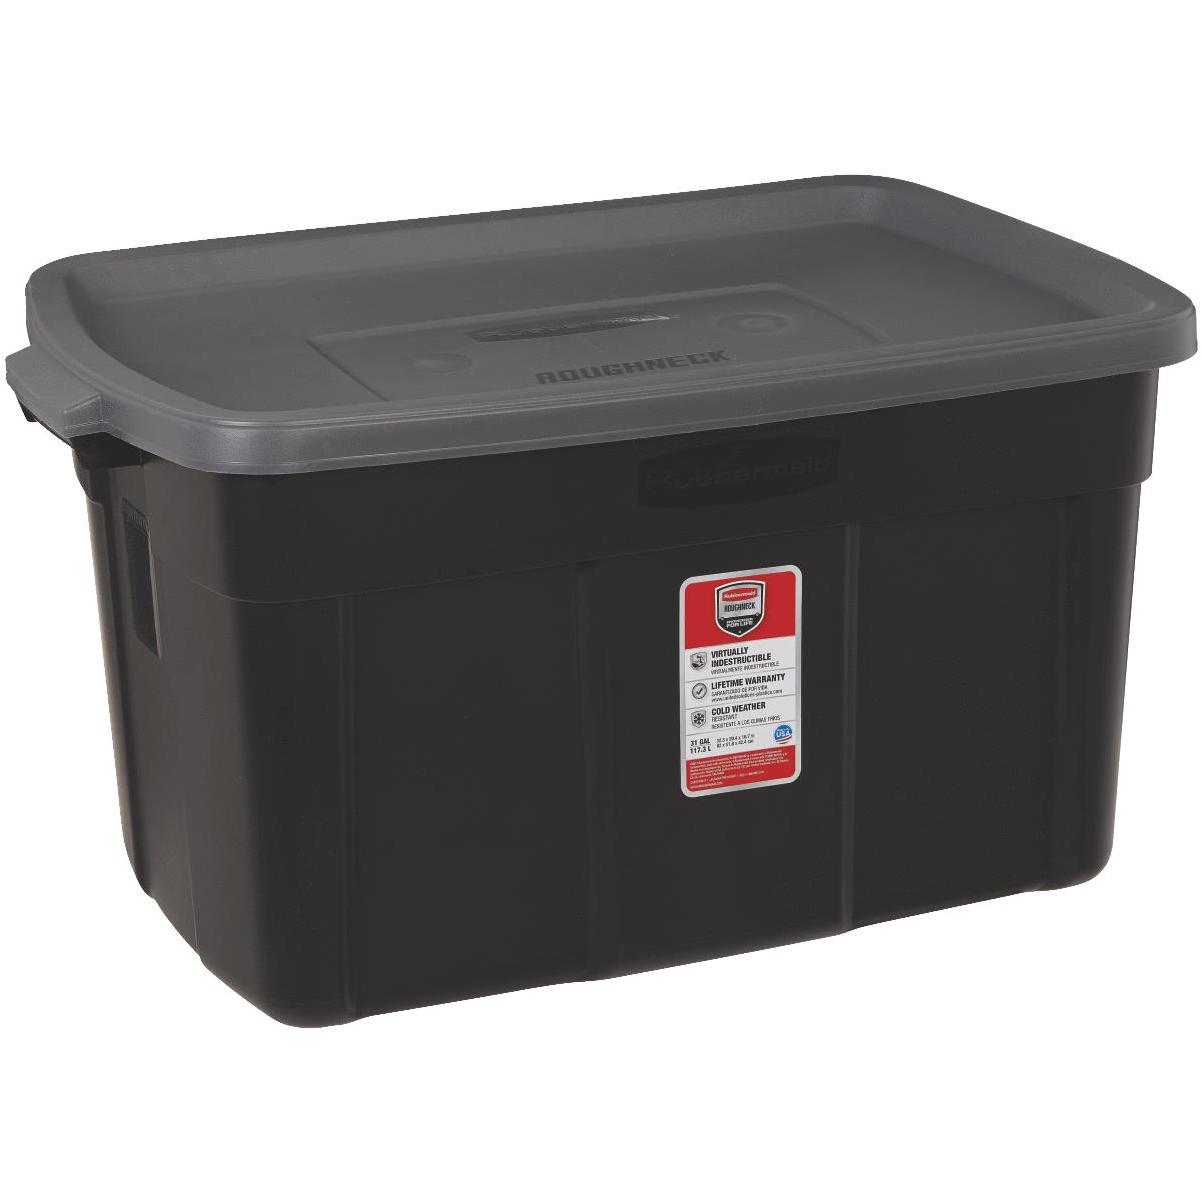 Rubbermaid Commercial Brute 14 Gal. Gray Storage Tote with Lid